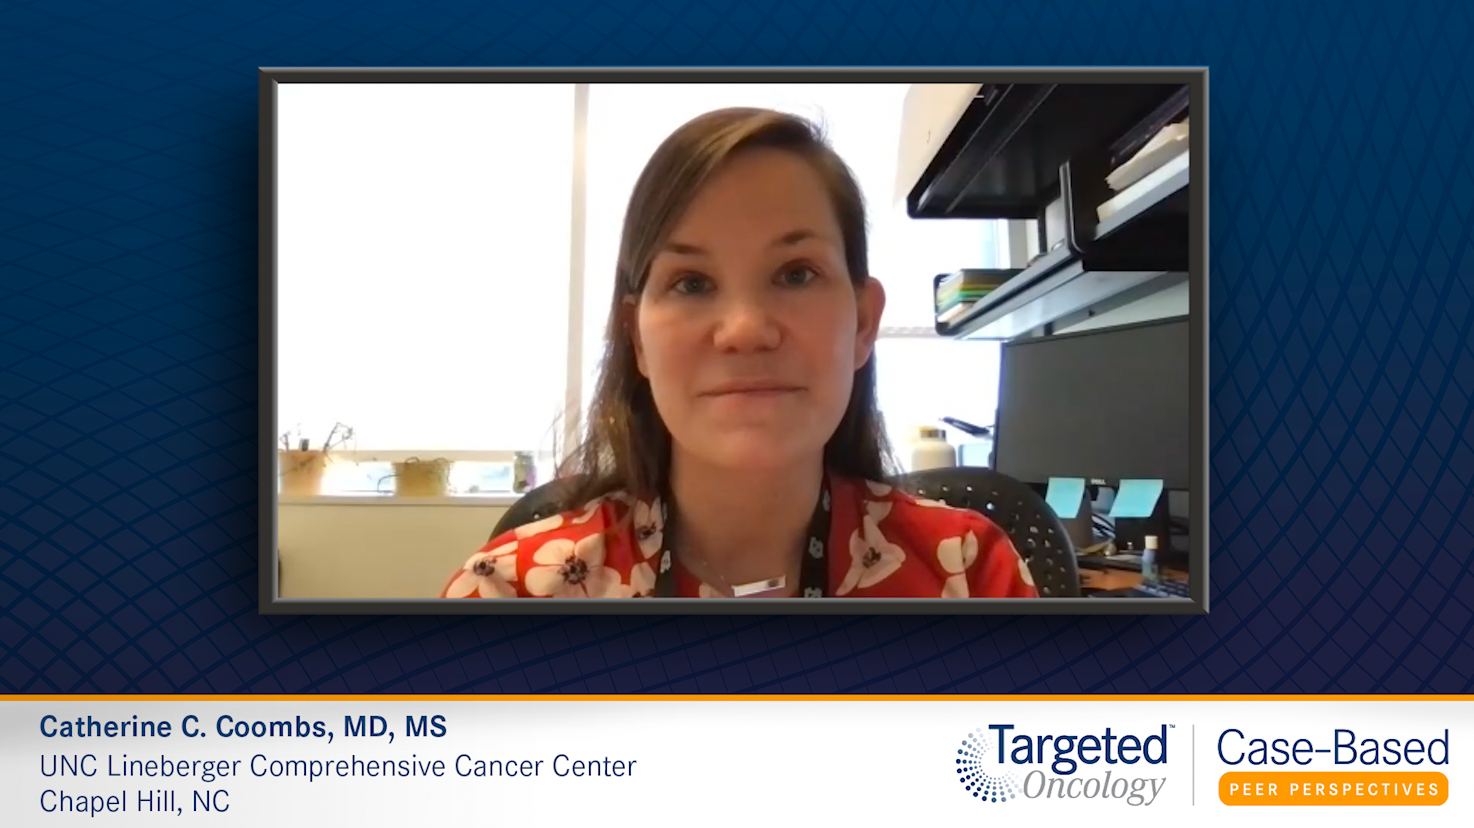 Emerging Treatment Options for Patients with R/R CLL